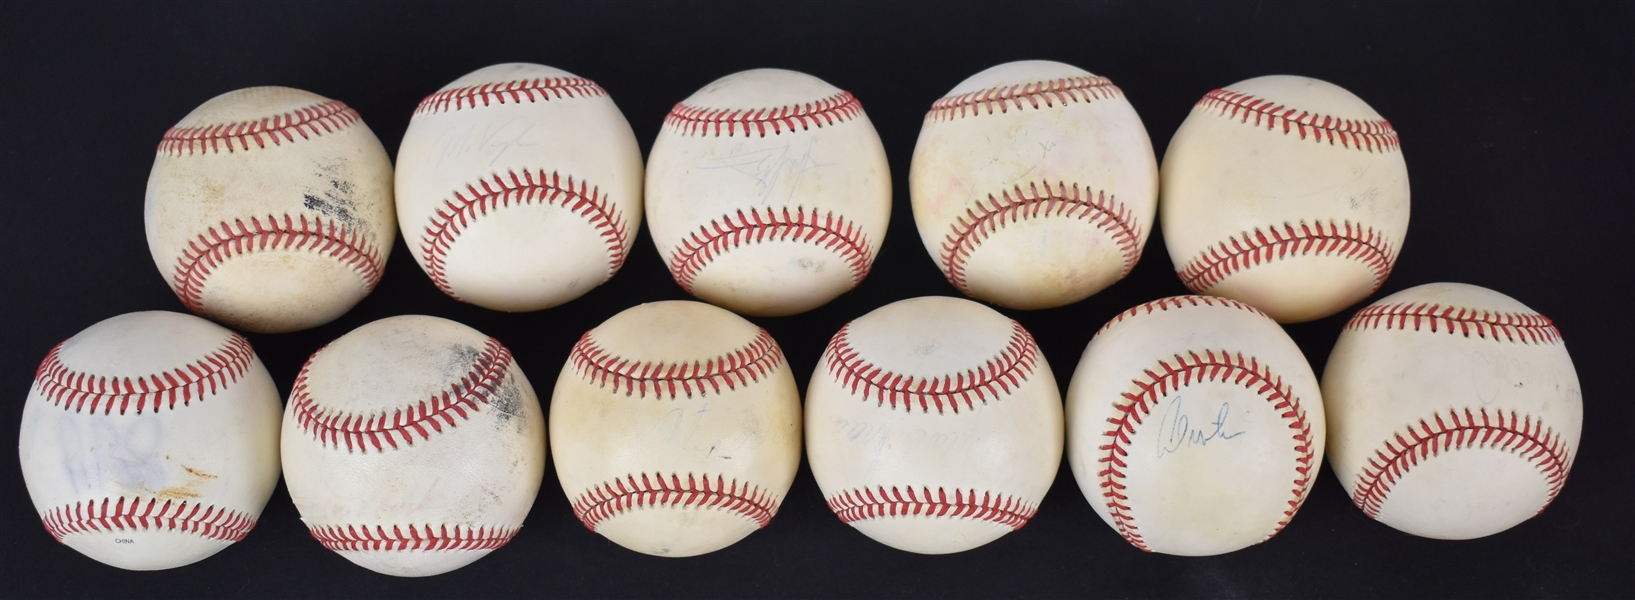 Collection of 11 Game Used & Autographed Baseballs w/Albert Pujols